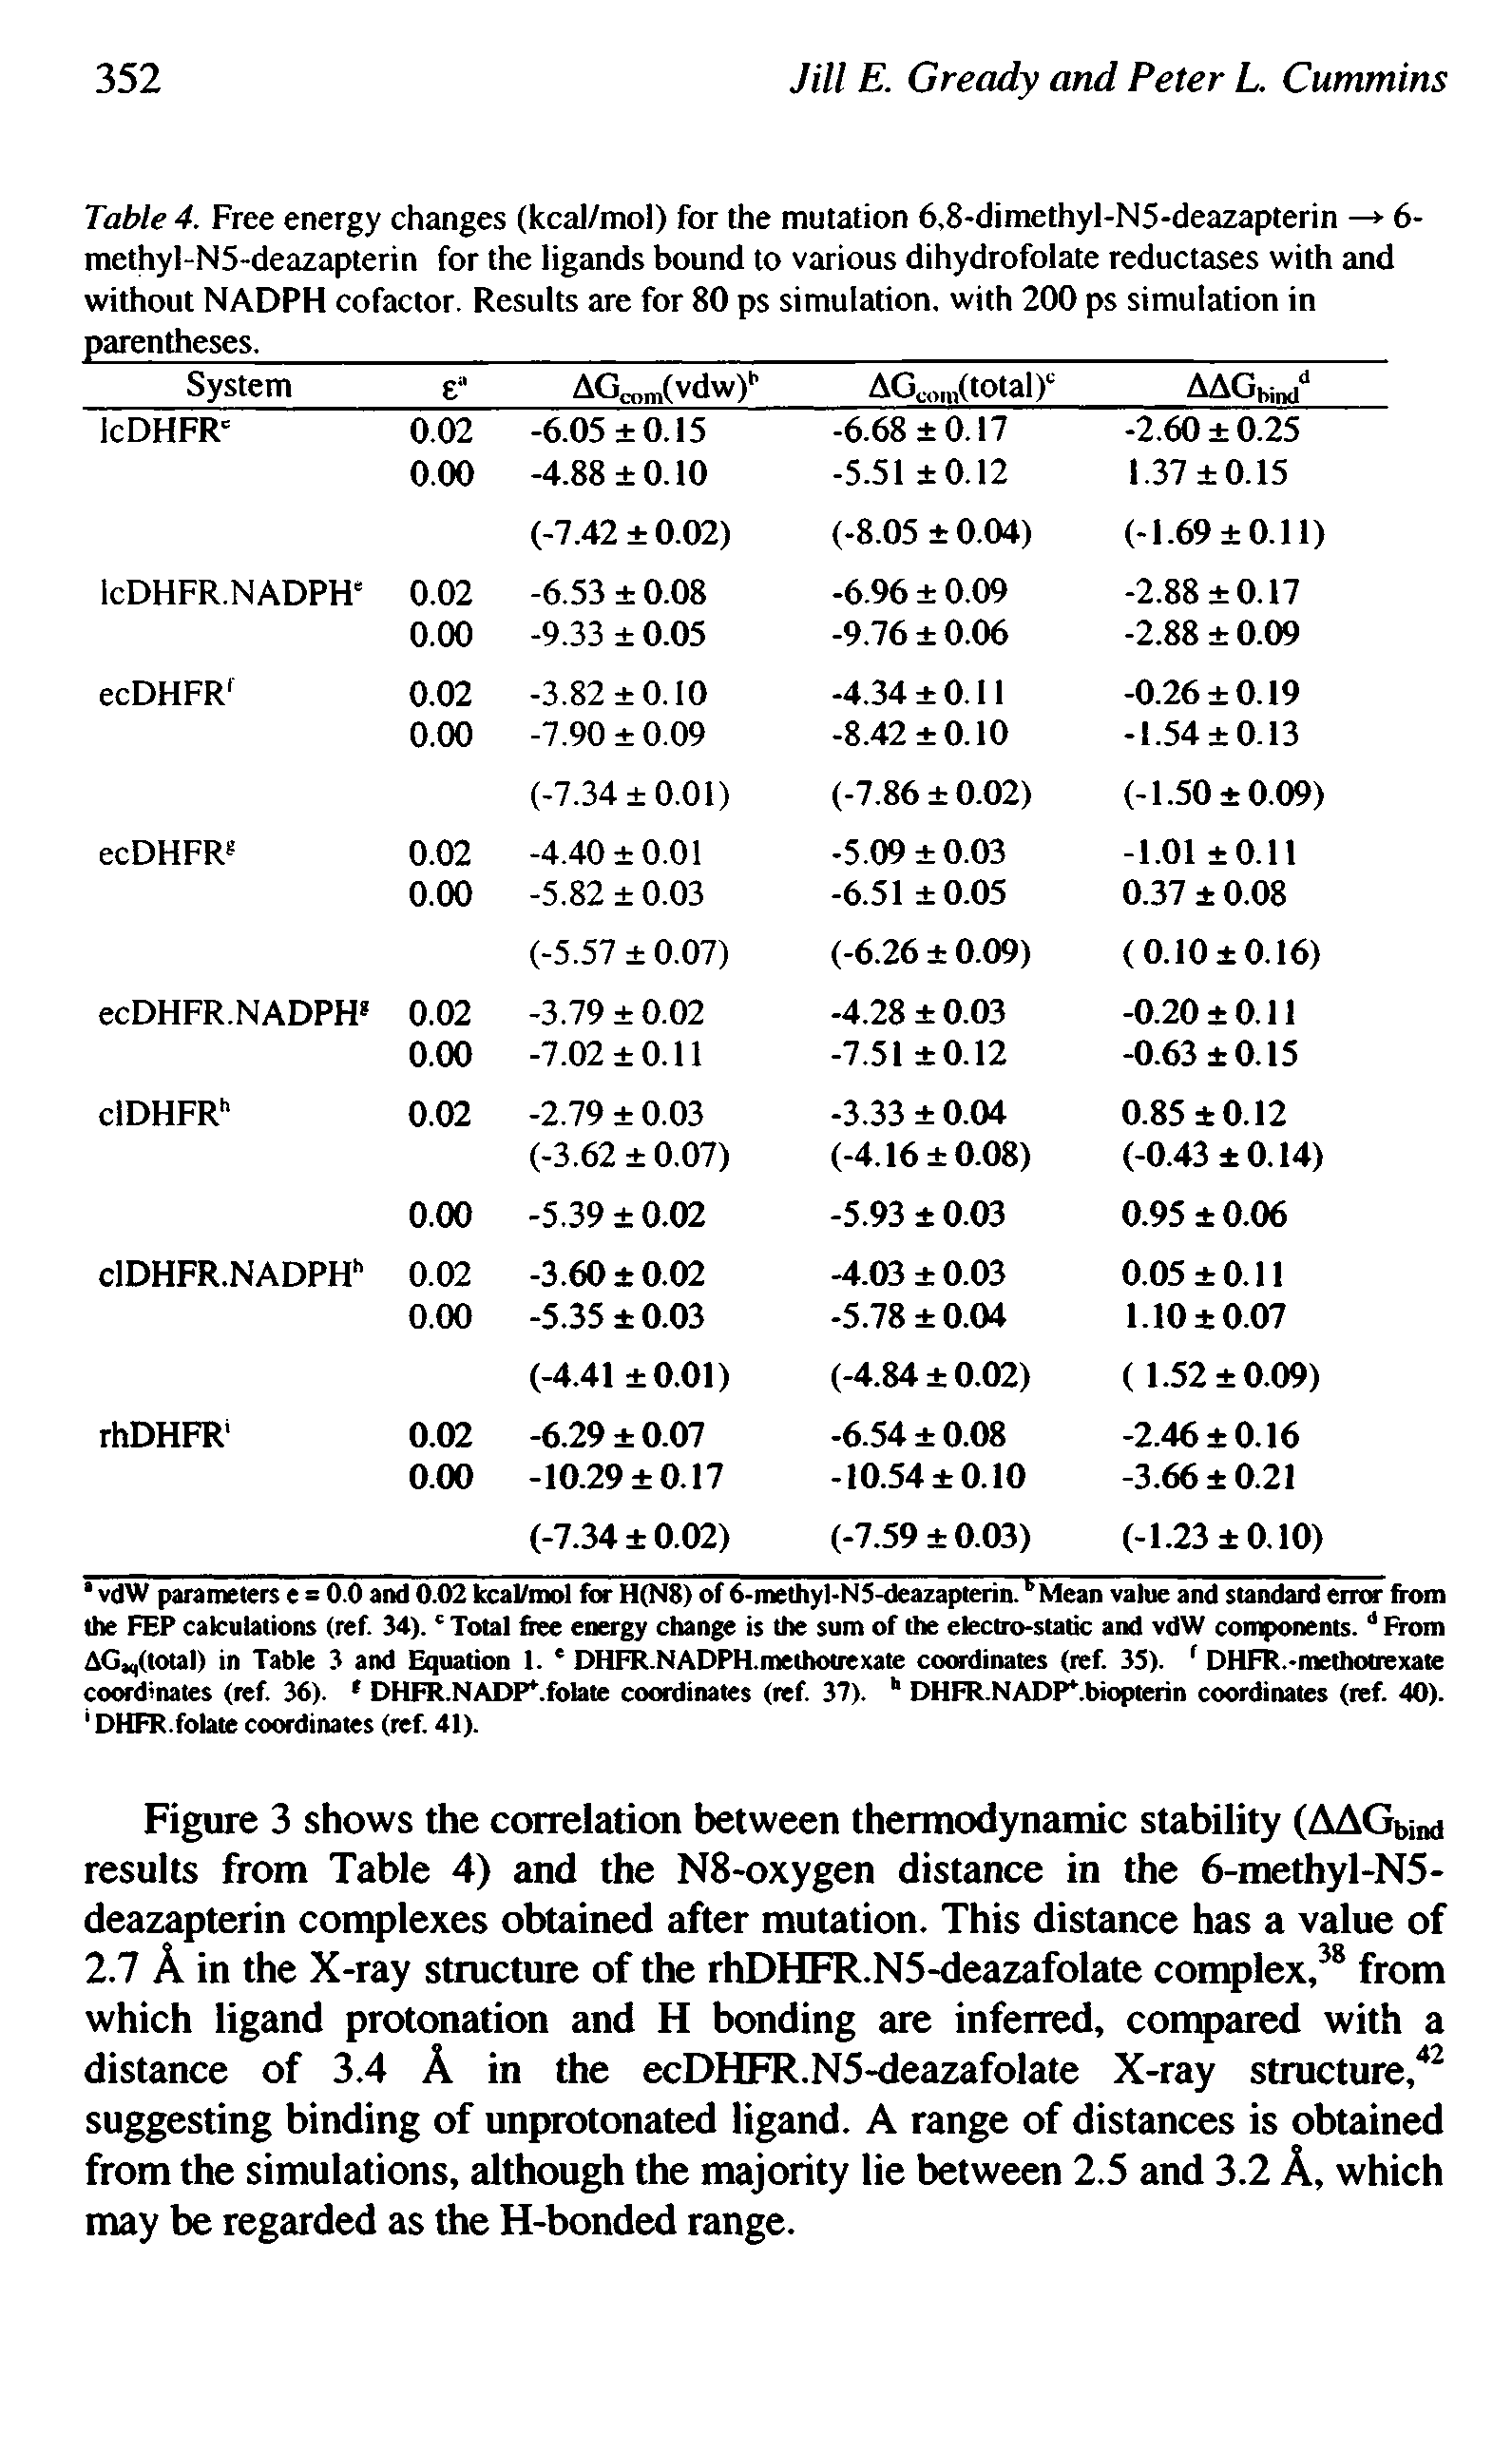 Table 4. Free energy changes (kcal/mol) for the mutation 6,8-dimethyl-N5-deazapterin — 6-methyl-N5-deazapterin for the ligands bound to various dihydrofolate reductases with and without NADPH cofactor. Results are for 80 ps simulation, with 200 ps simulation in parentheses. ...